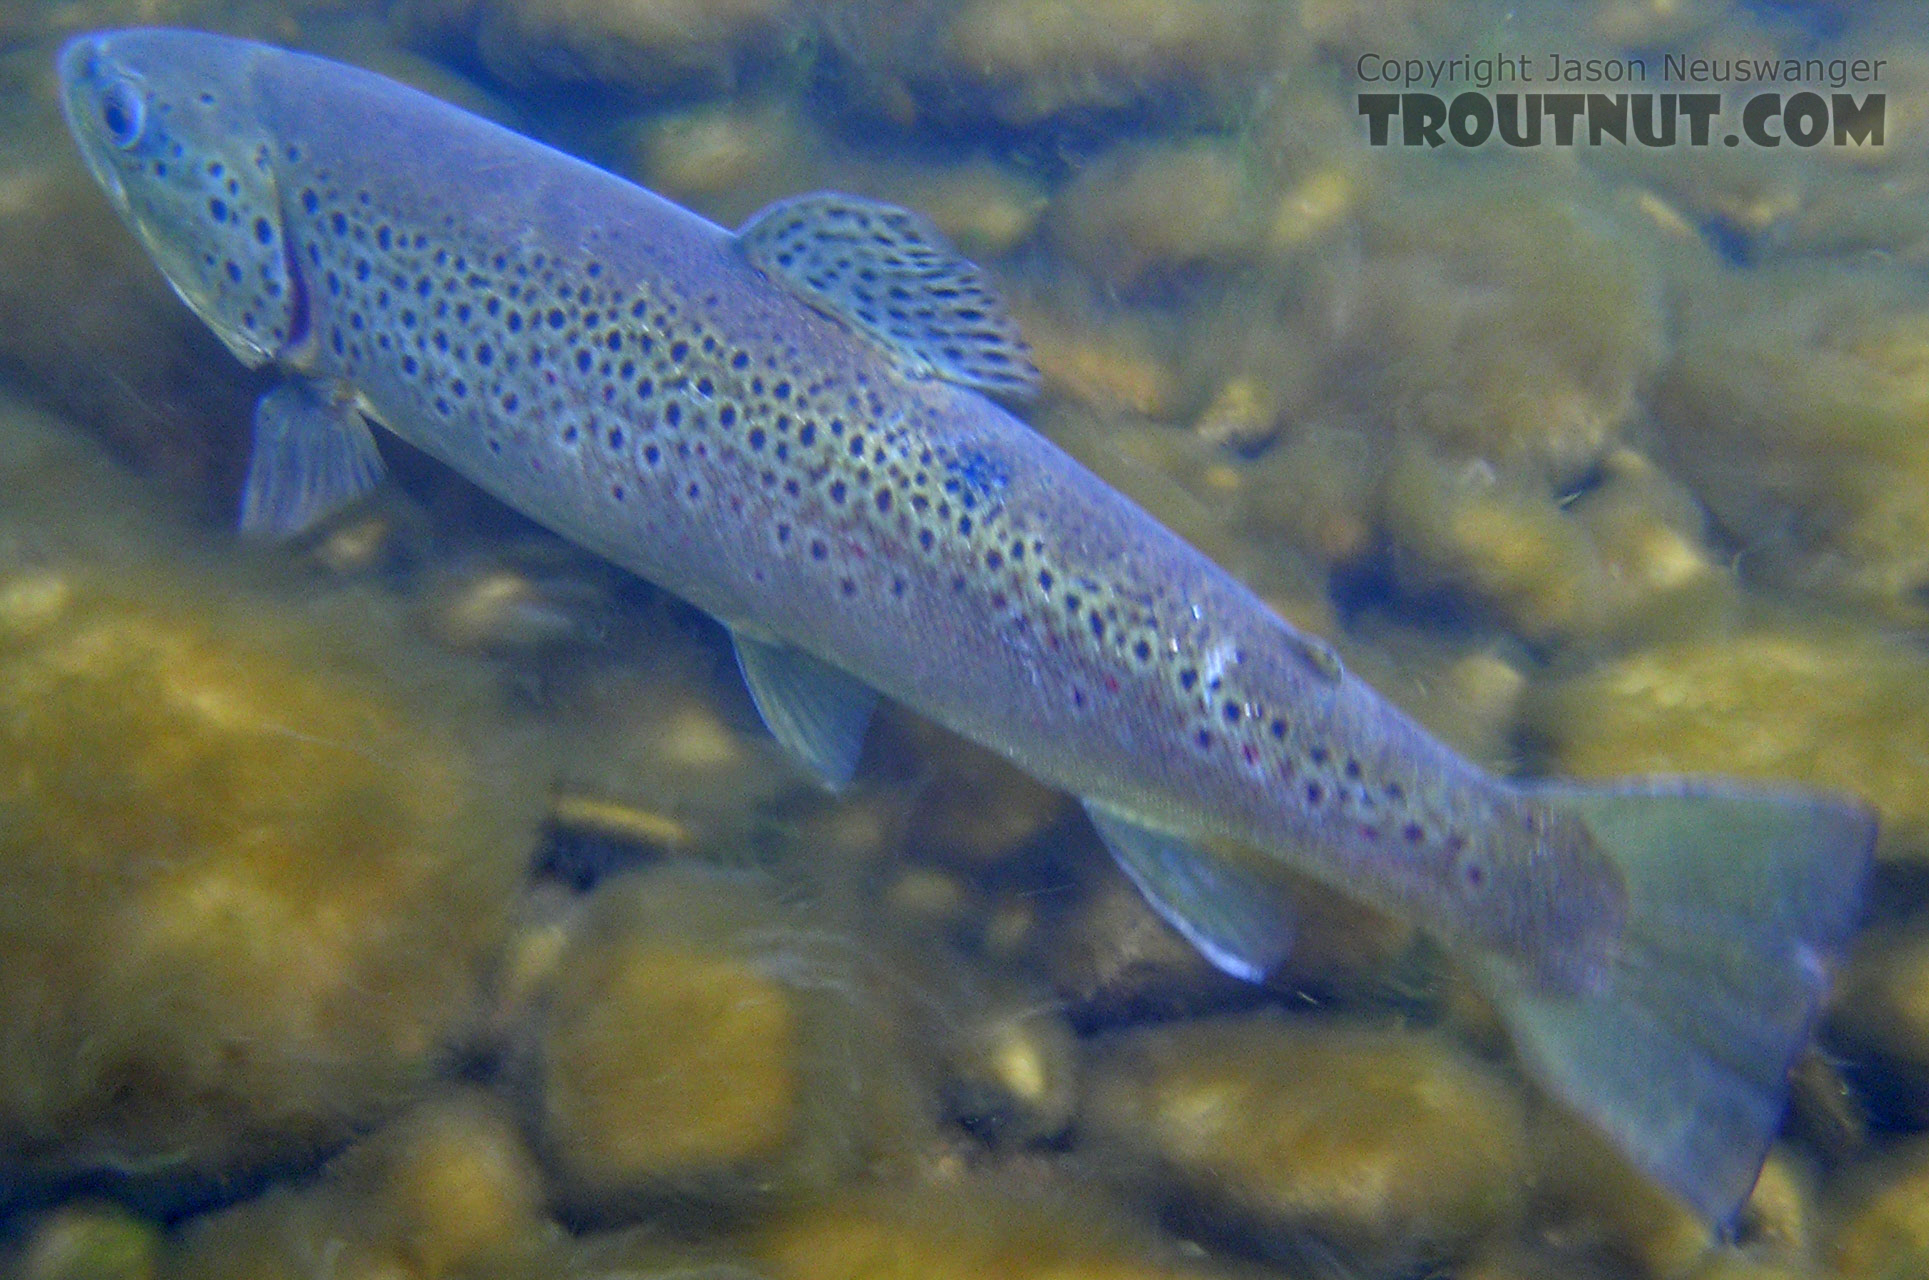 Here's my first trout of 2005, a 17-inch brown, photographed underwater after release. From the Beaverkill River in New York.